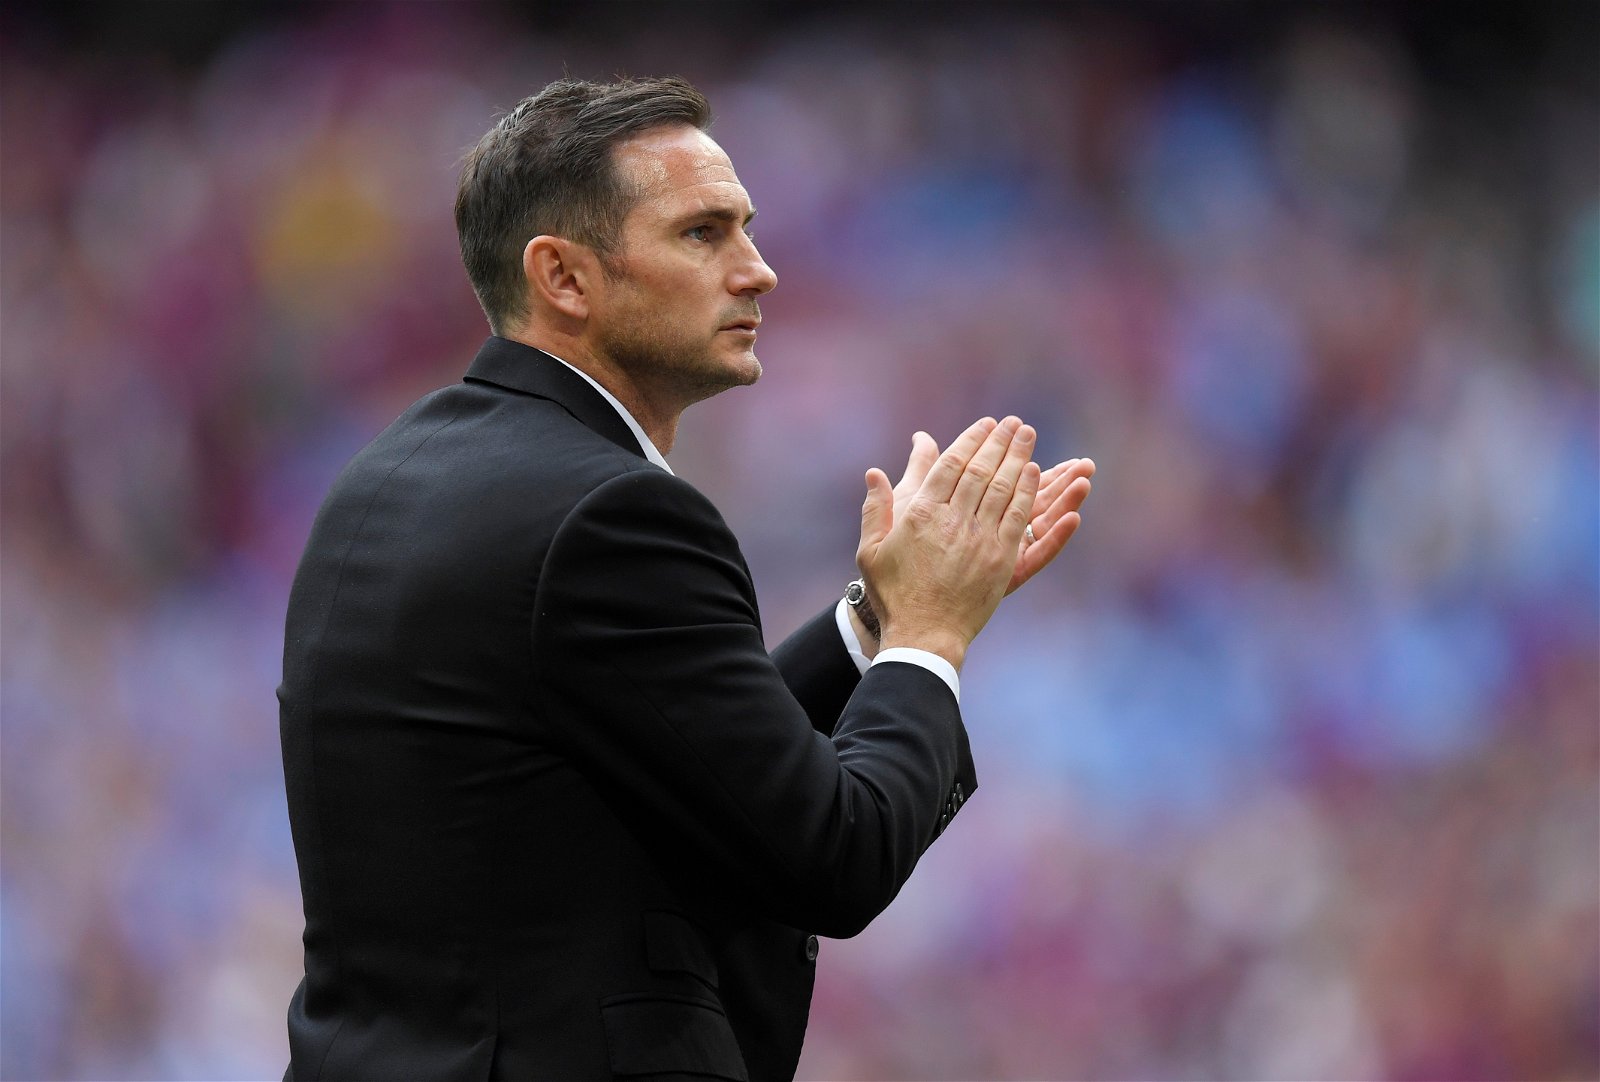 Derby demands Chelsea be respectful in their Lampard approach